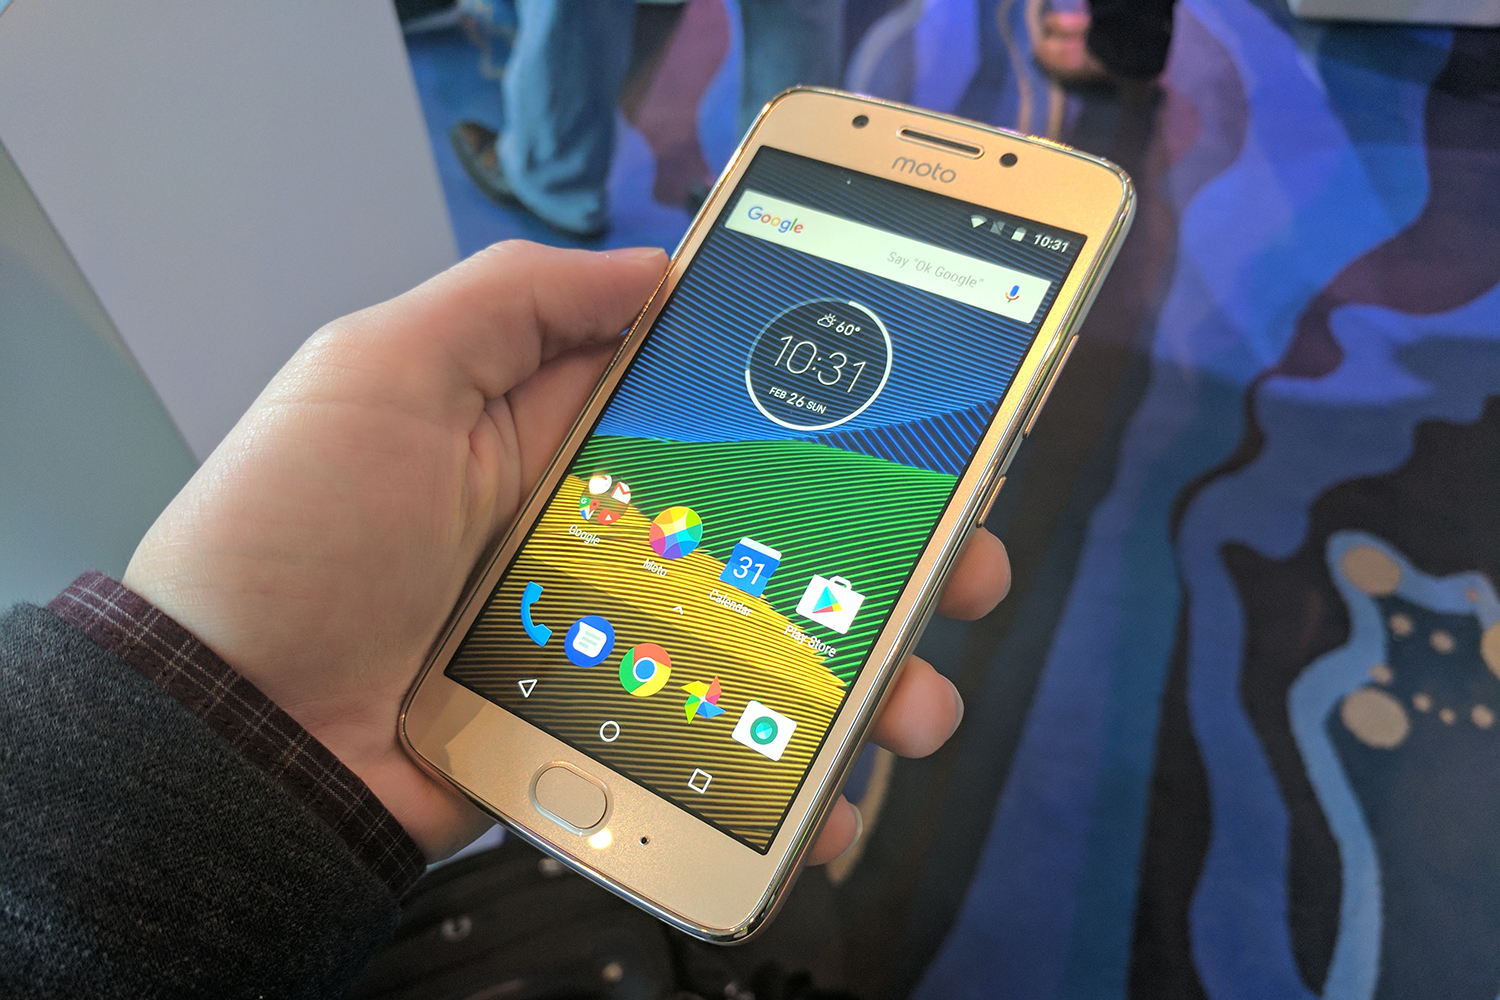 Moto G5 and Moto G5 Plus Our first take